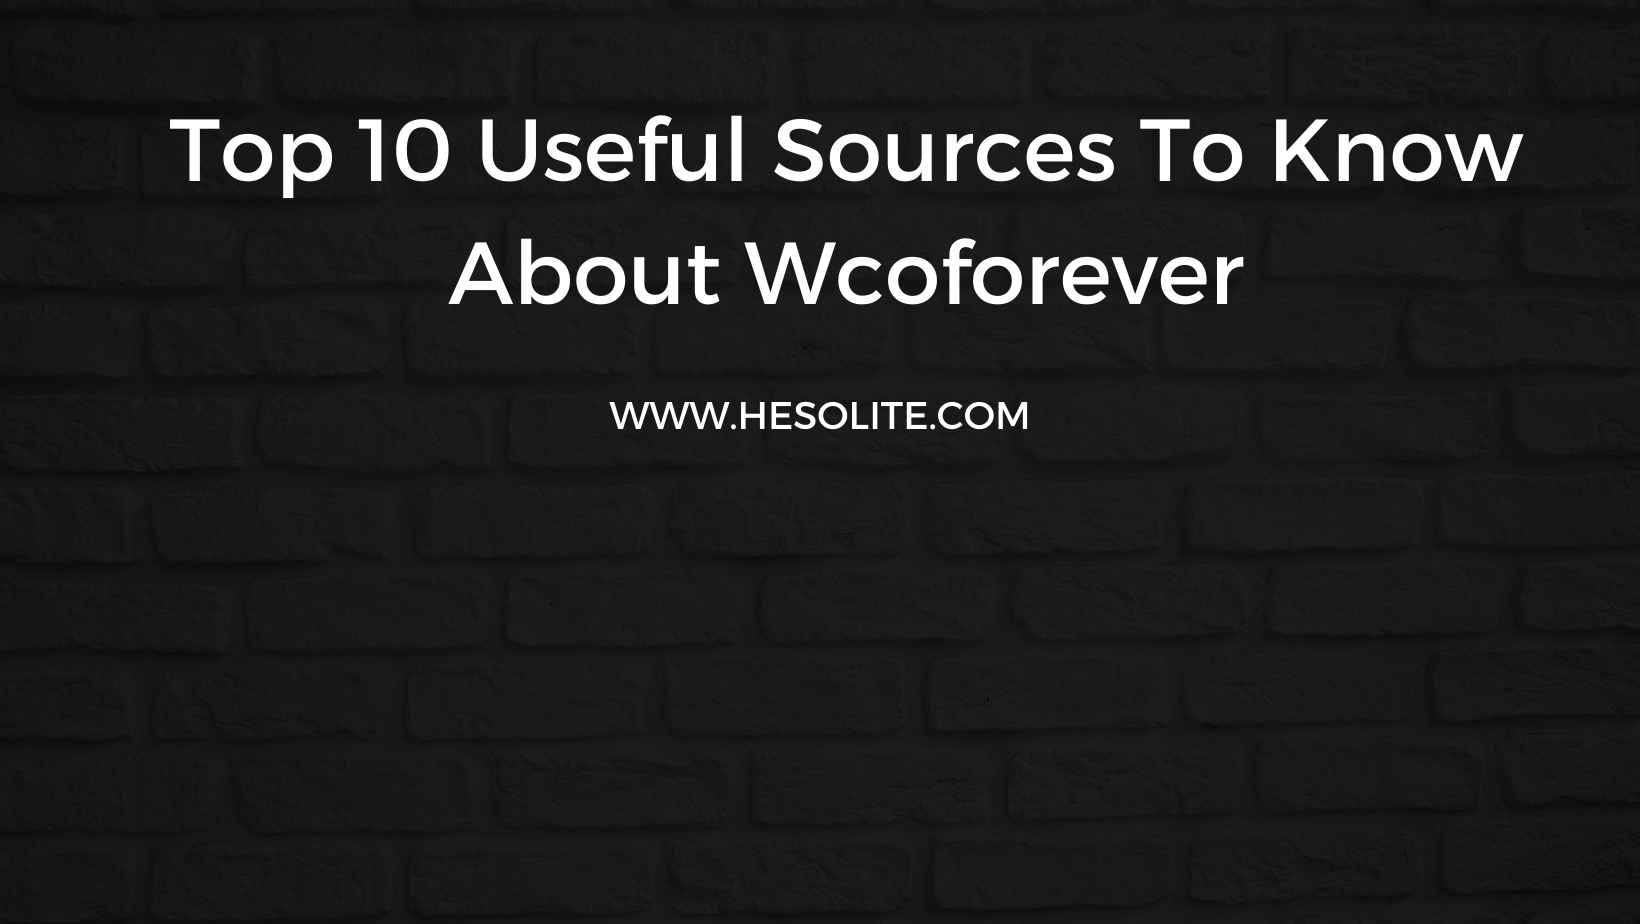 Top 10 Useful Sources To Know About Wcoforever